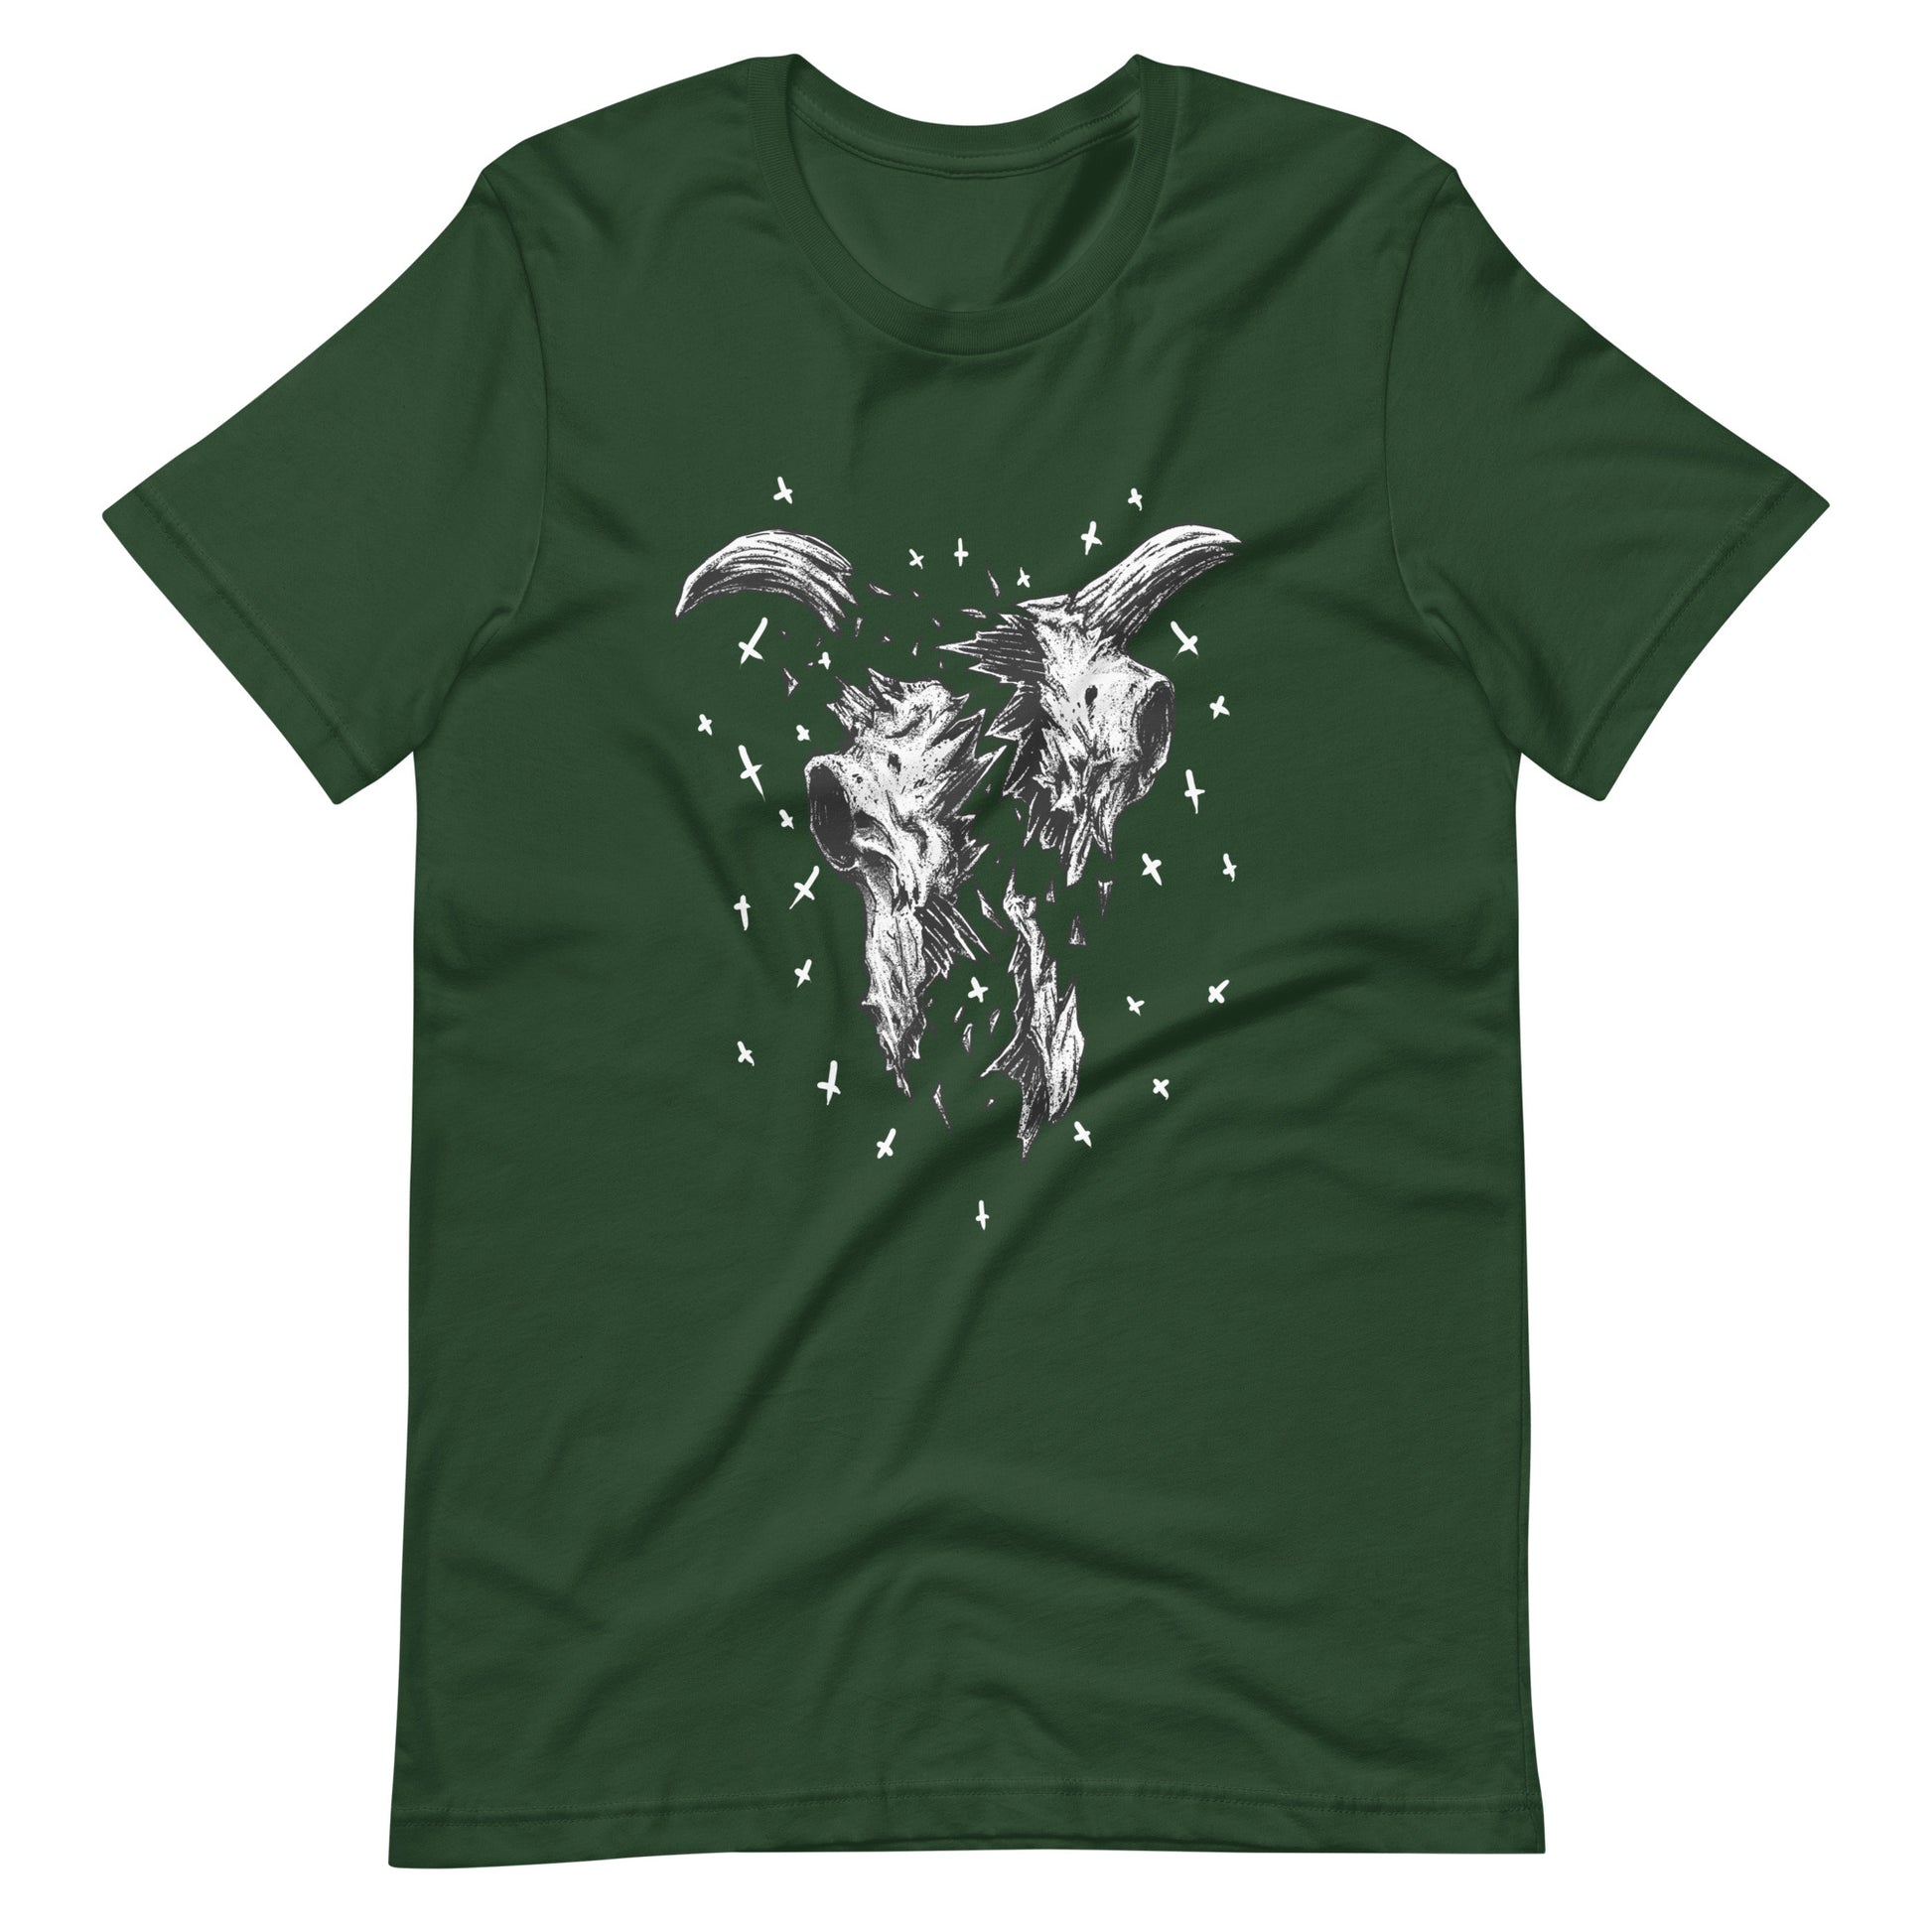 Crushed - Men's t-shirt - Forest Front